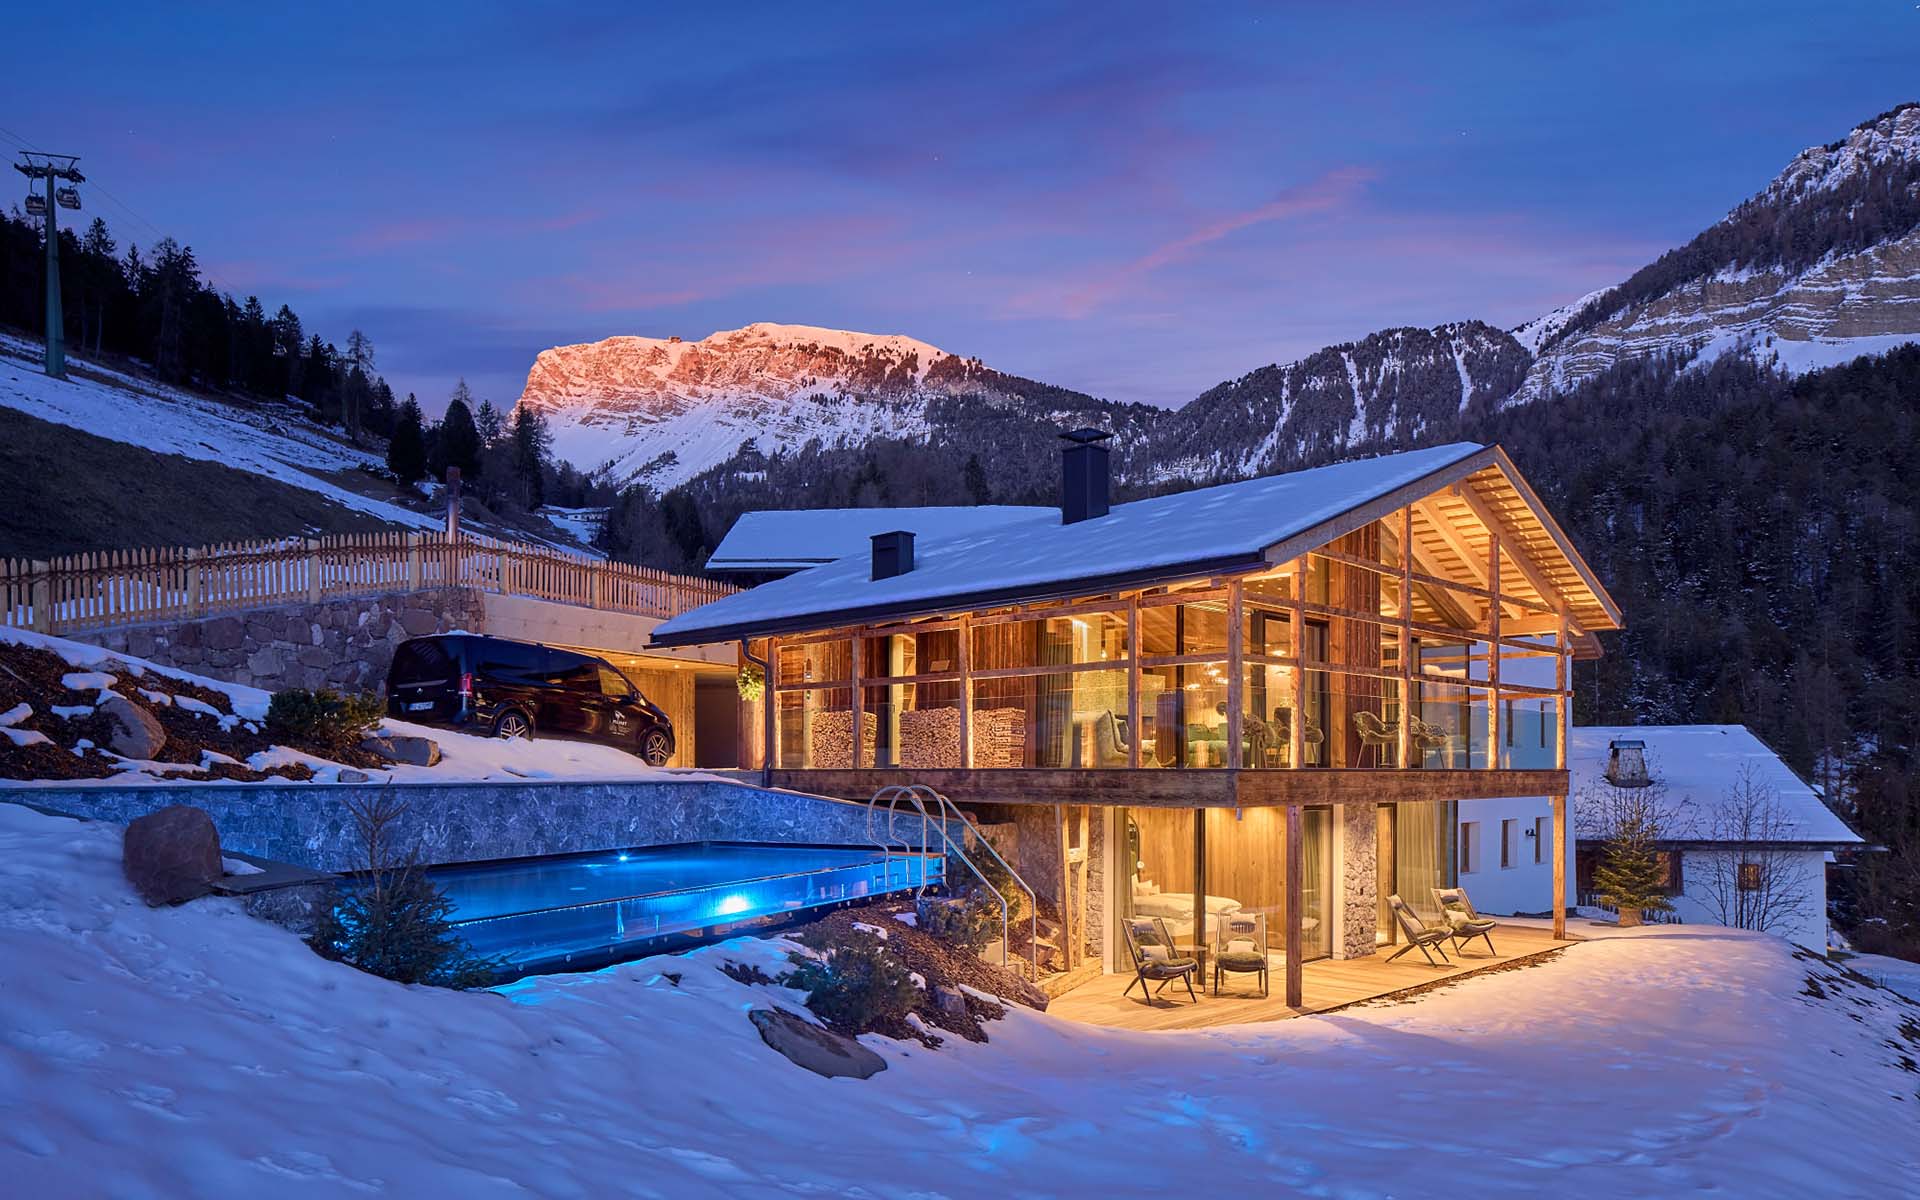 What to look for when choosing a luxury chalet